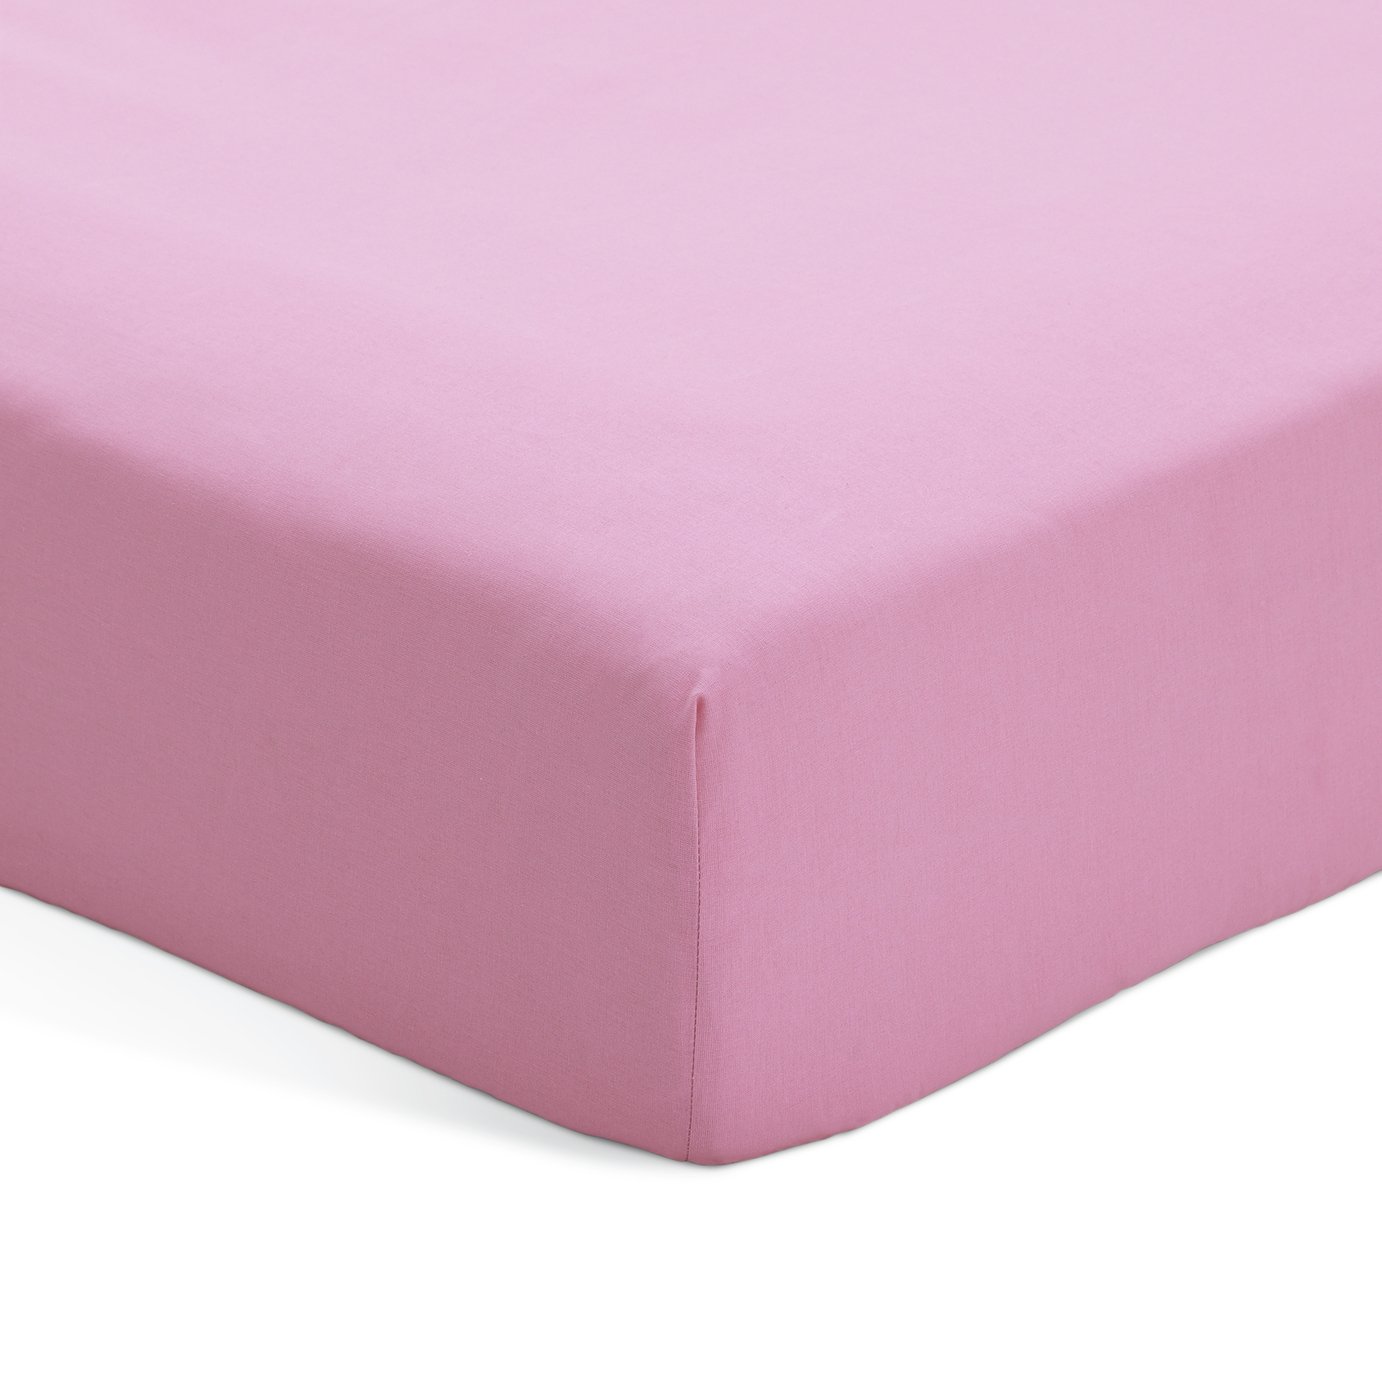 Habitat Polycotton Pink Fitted Sheet - King size